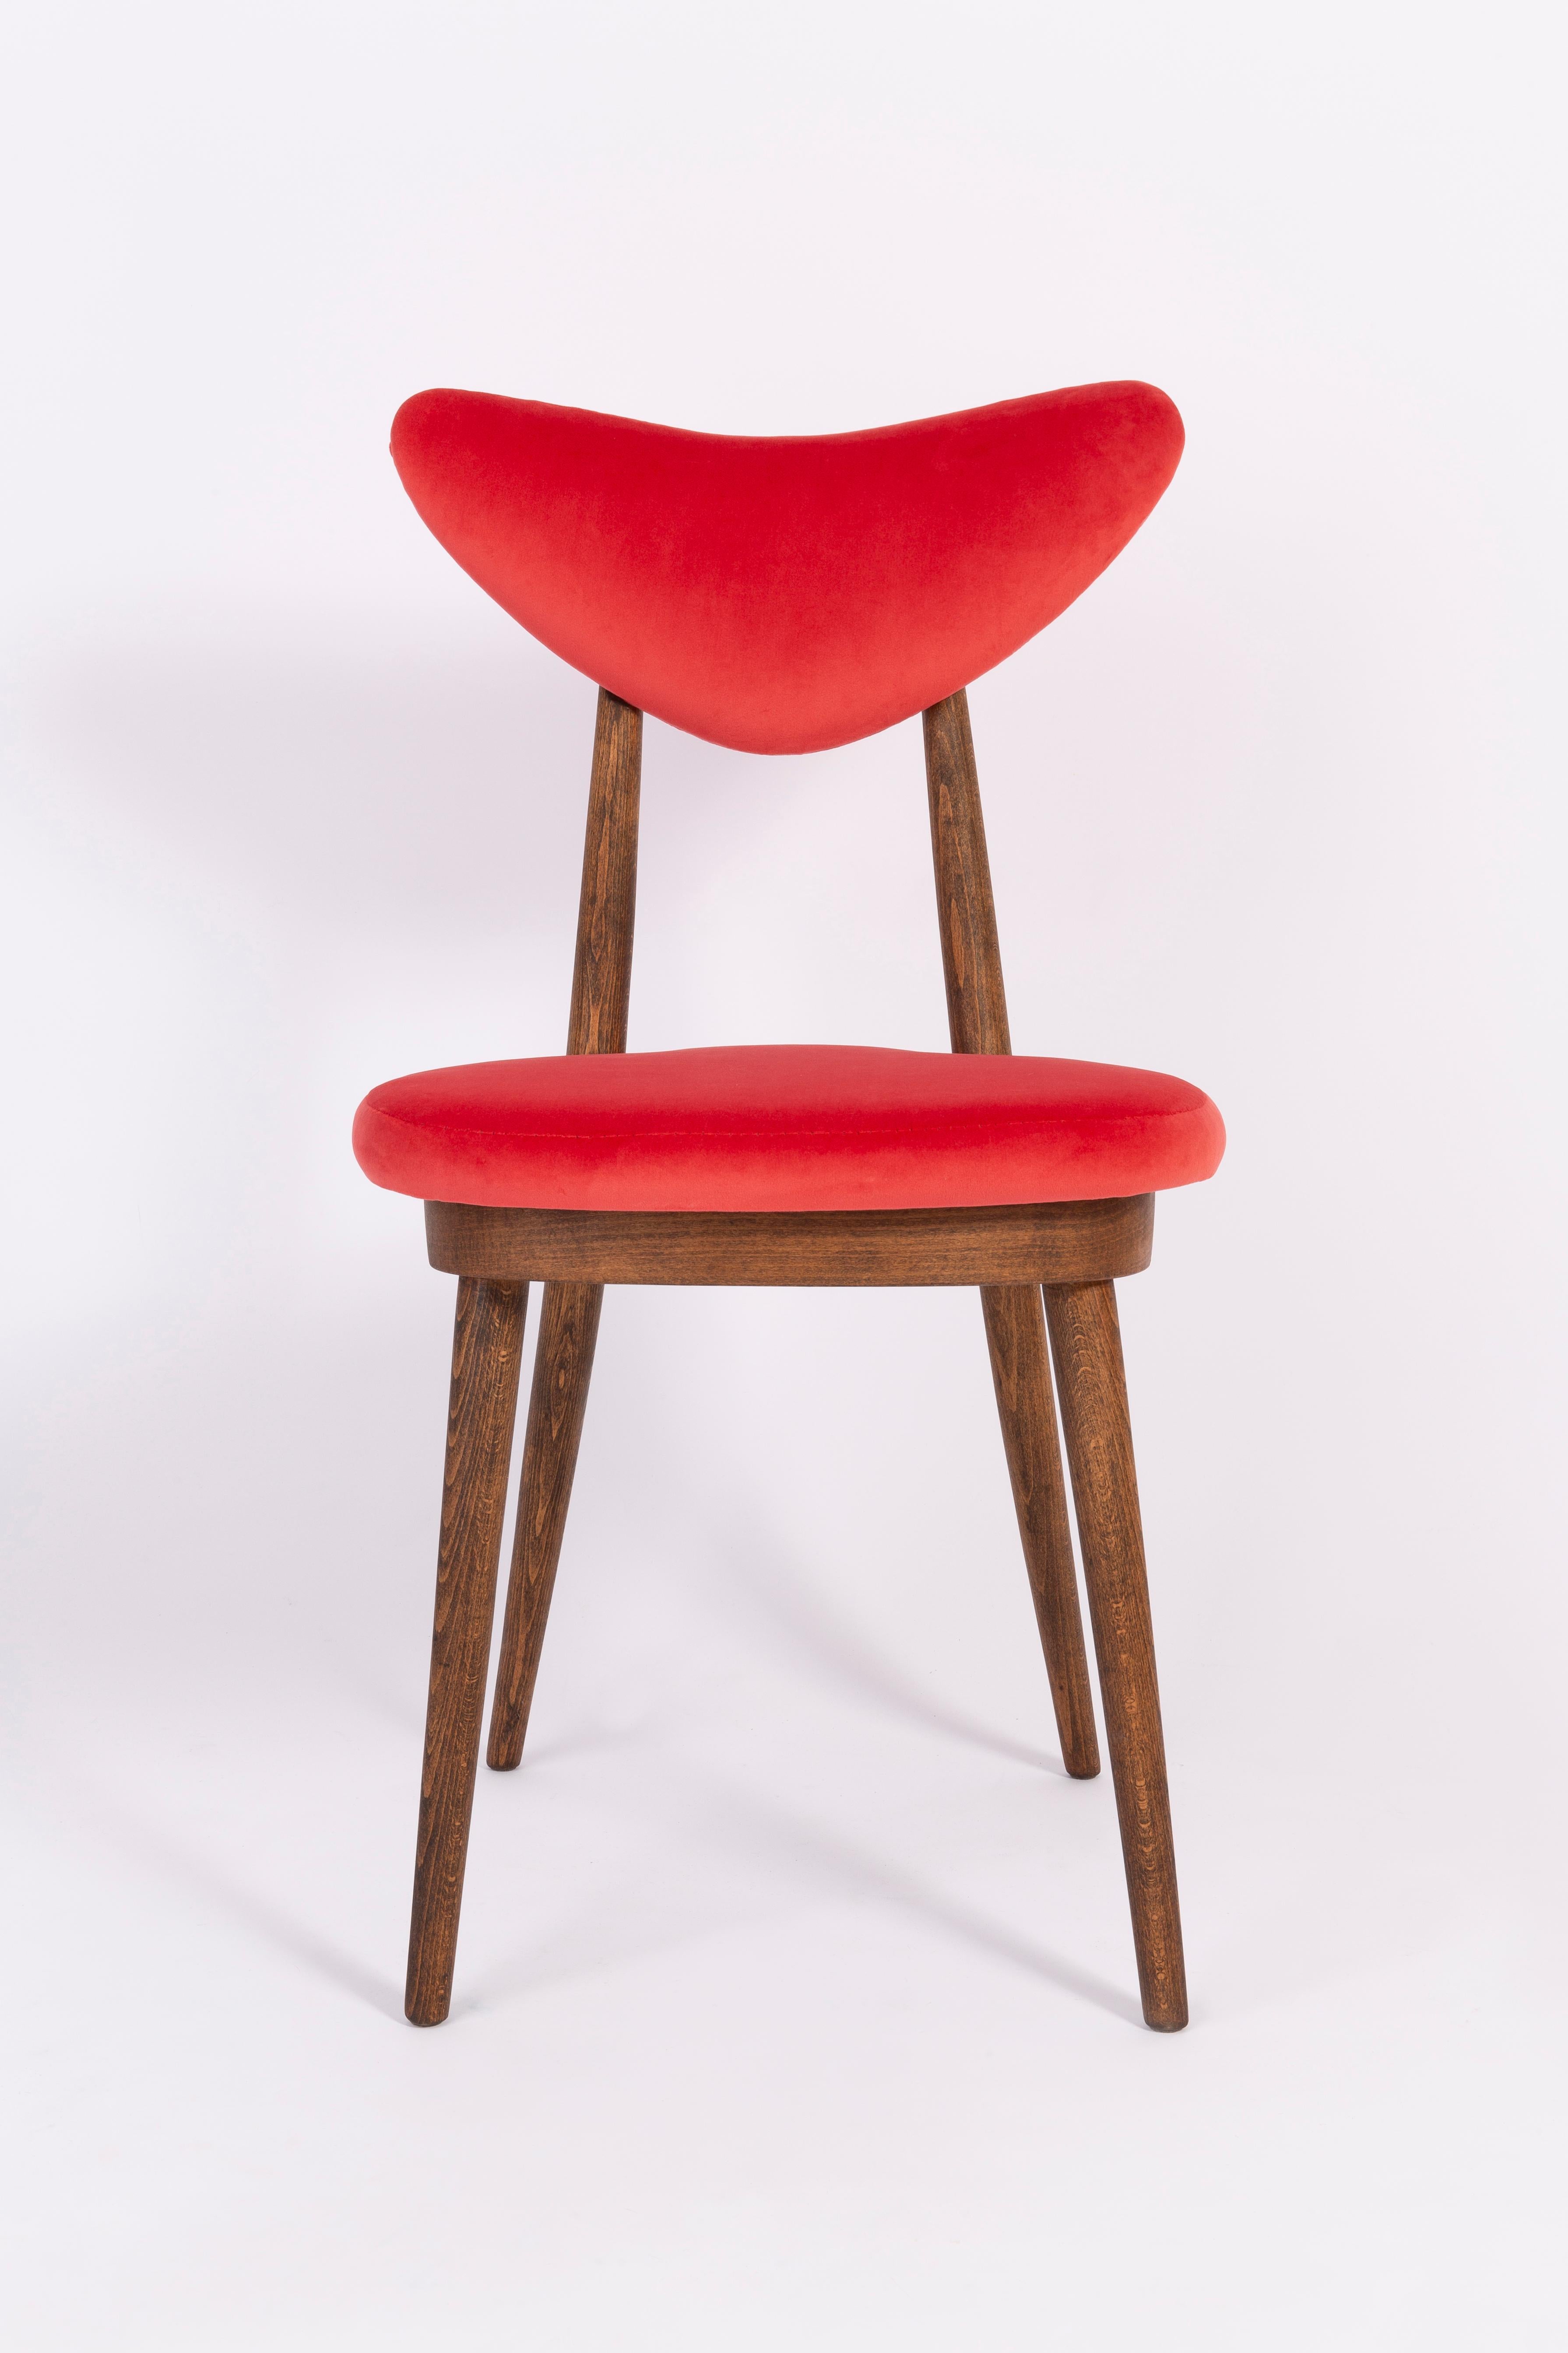 Set of Two Red Heart Chairs, Poland, 1960s For Sale 6